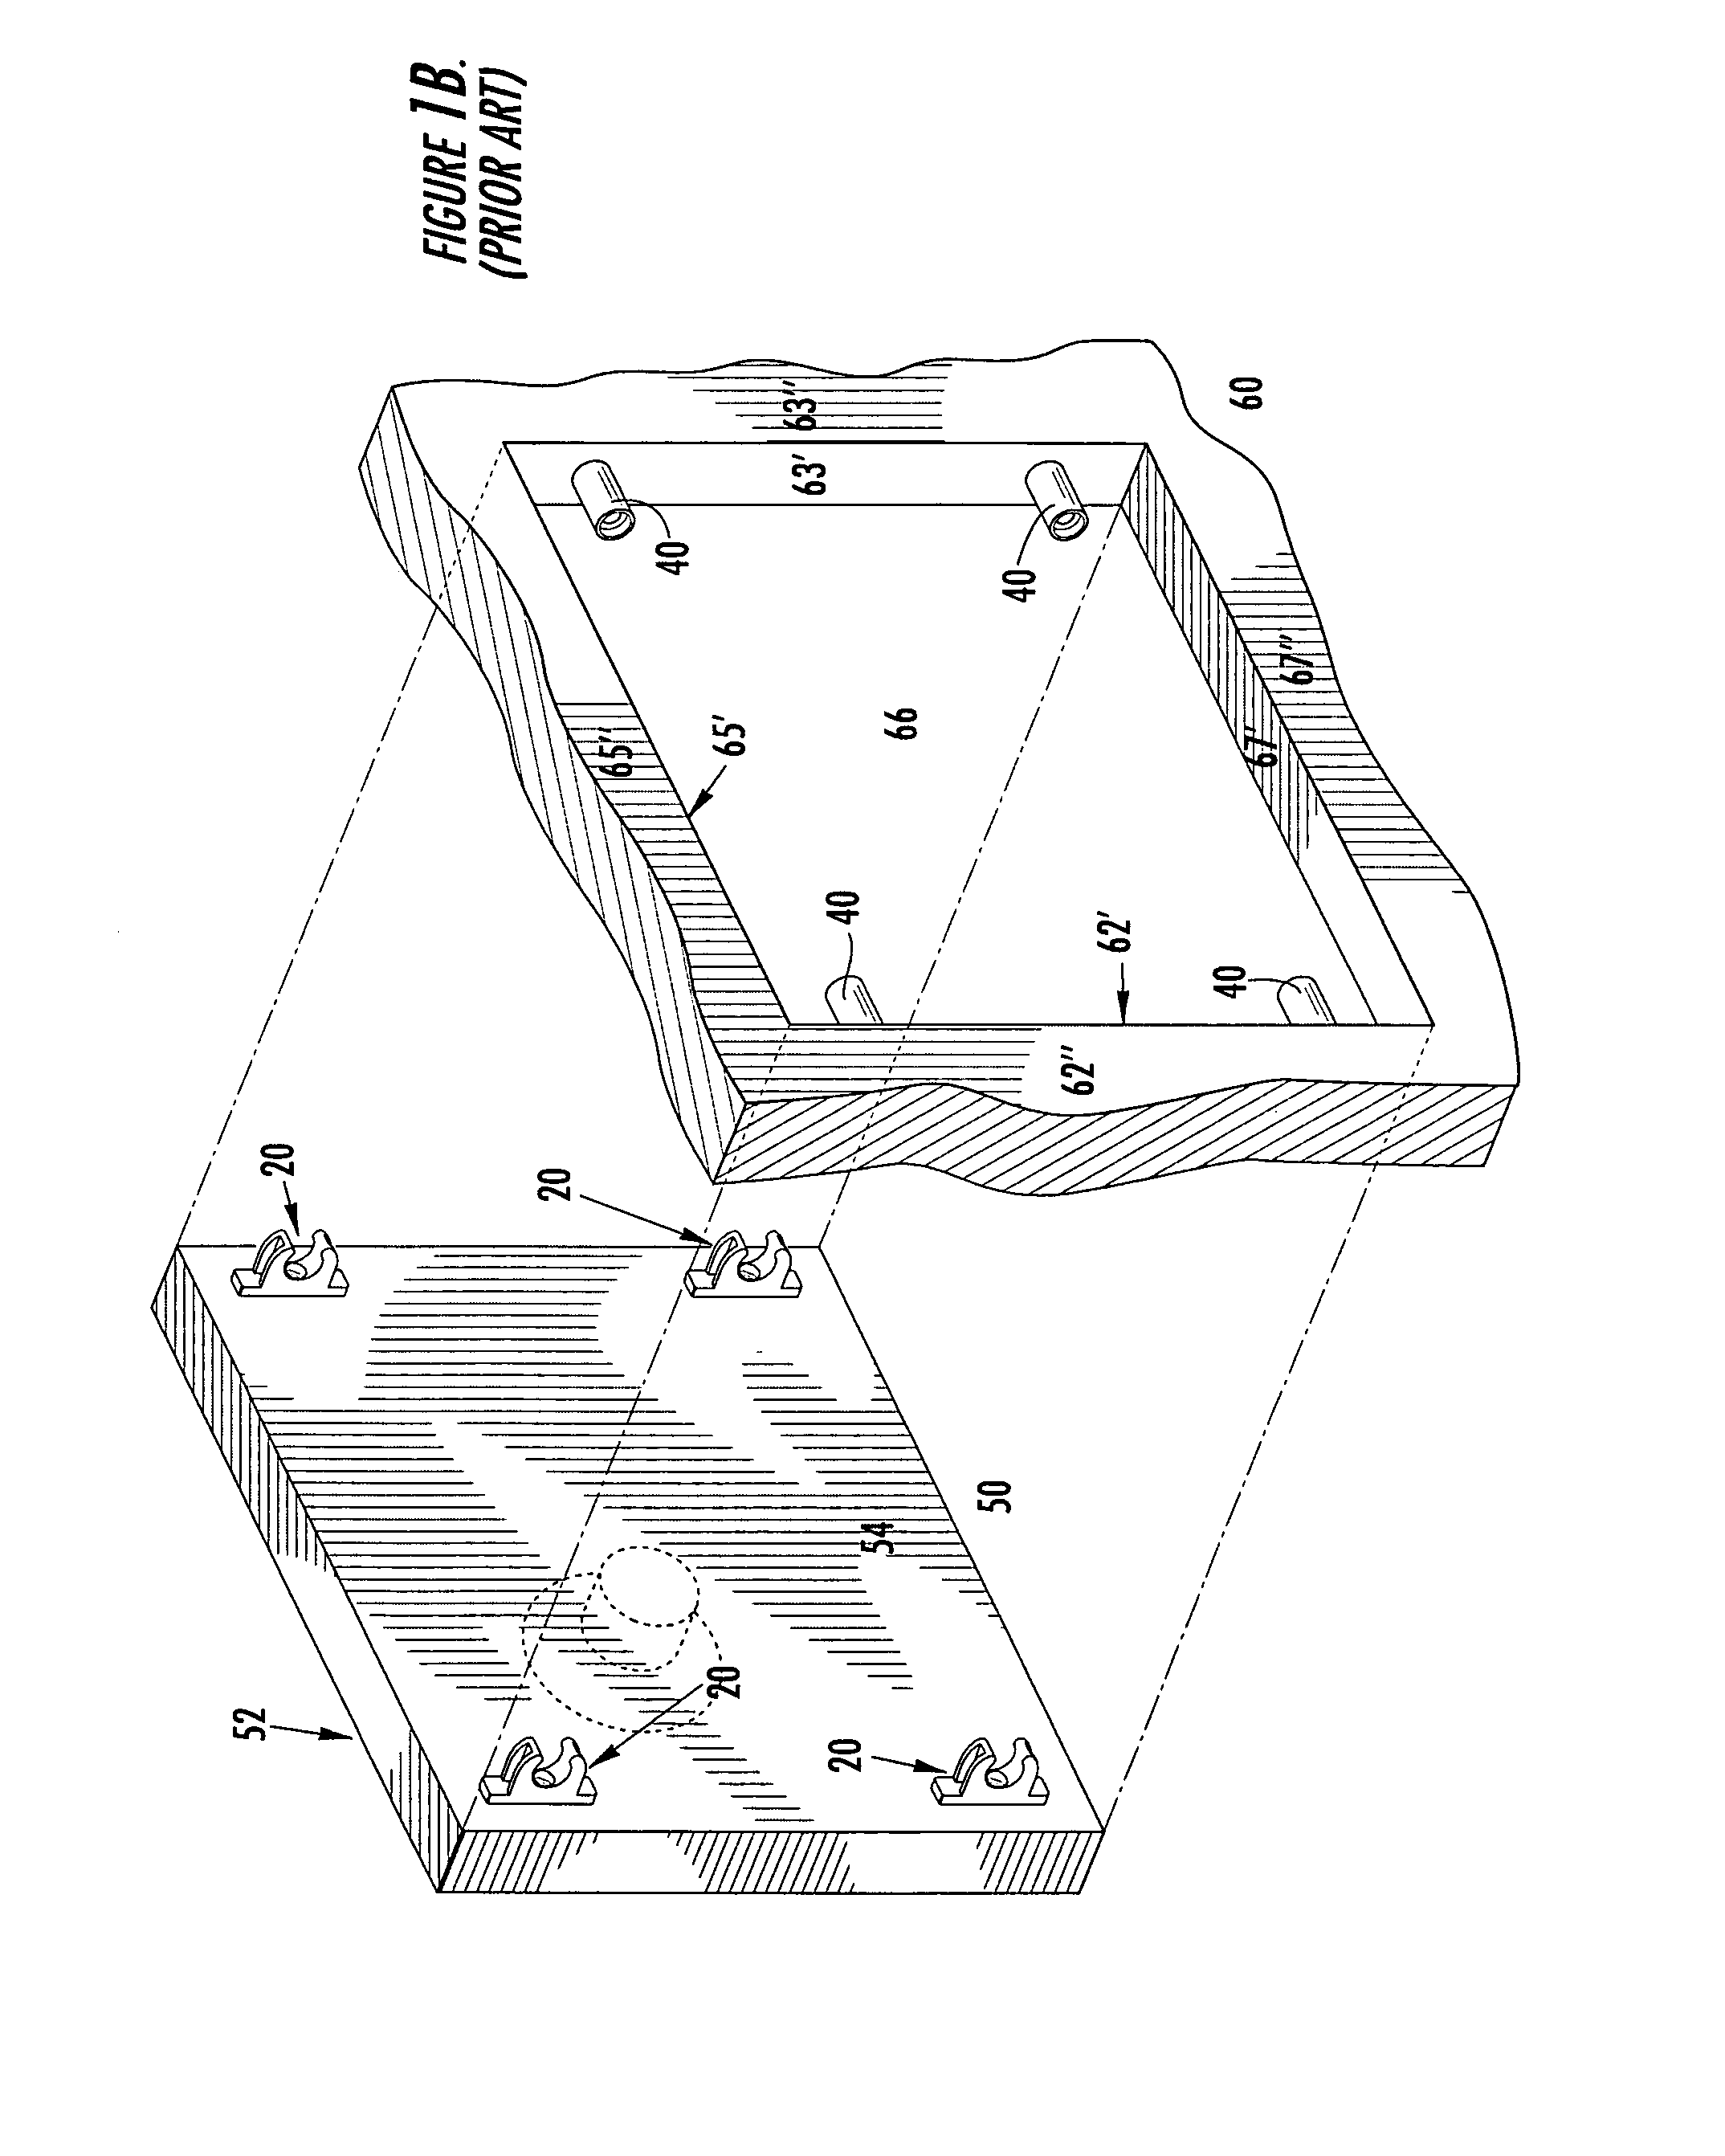 Cabinets with false fronts and associated false front connectors